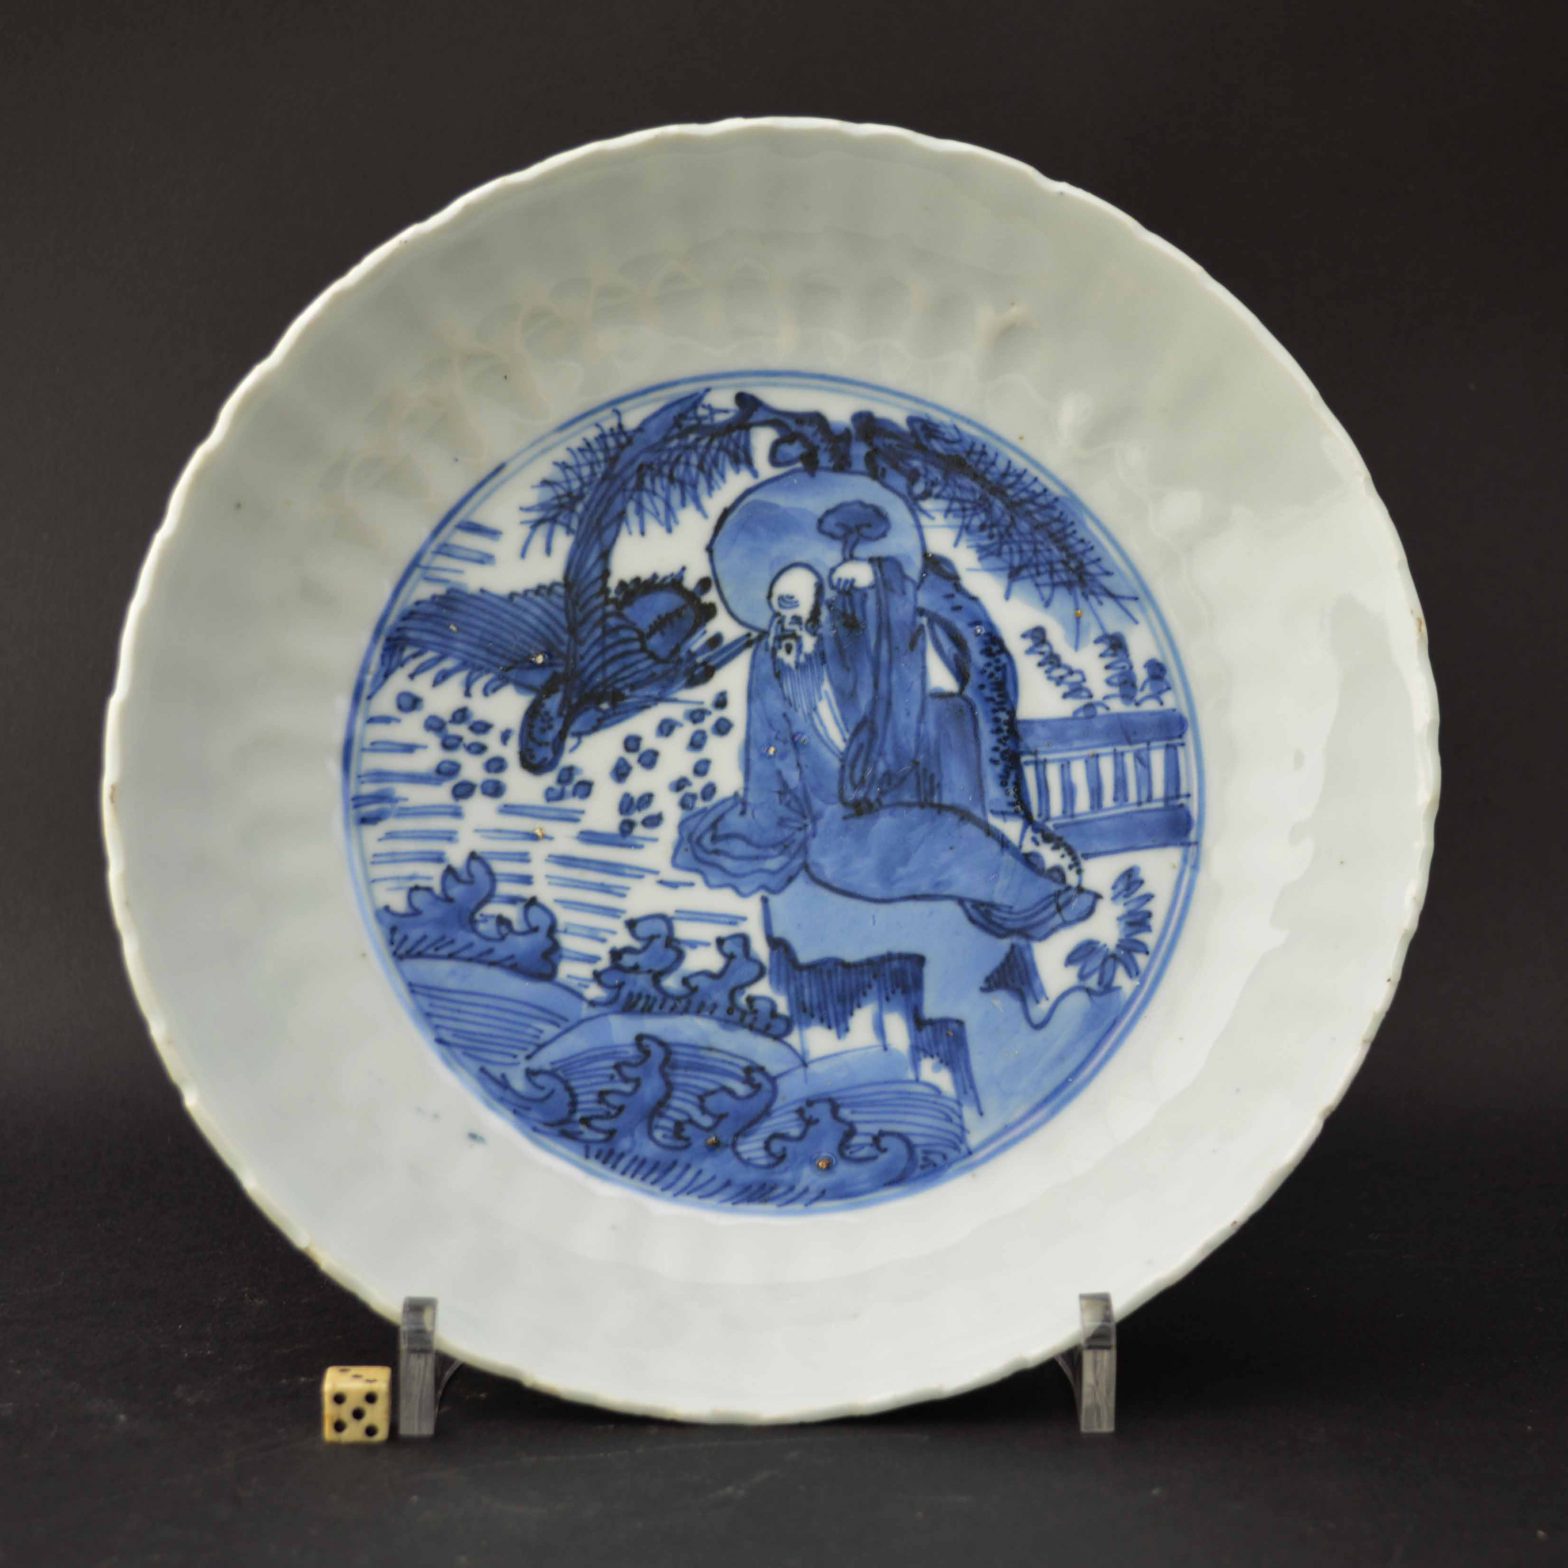 A Ming Porcelain Dish, Transitional, Tianqi 1621 - 1627, Depicting Shouloa in a Landscape -